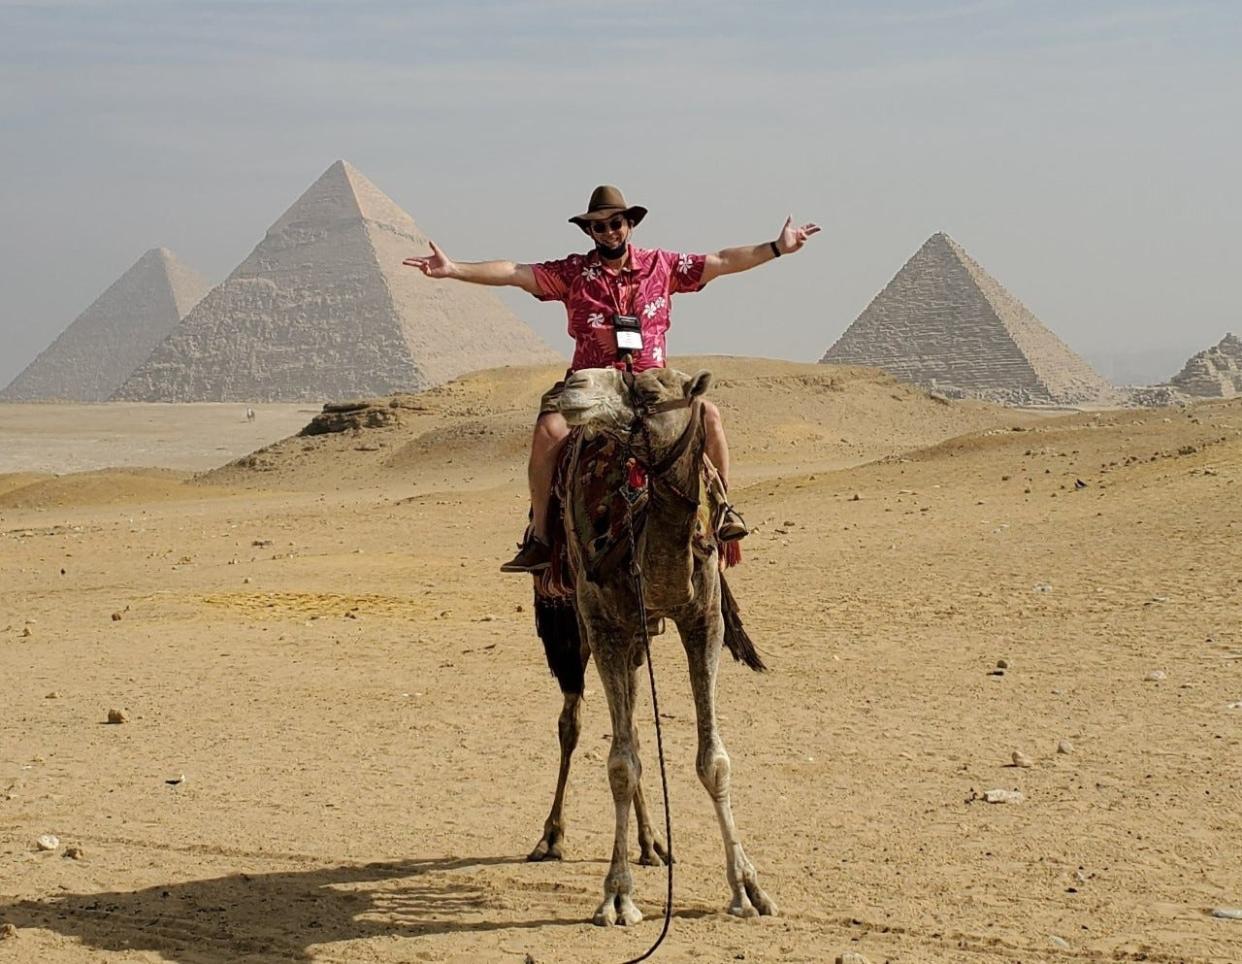 David Wahr is shown riding a camel. The Pyramids at Giza are in the background. Wahr's Feb. 10 presentation is Petersburg will include stories of his travels by camel.